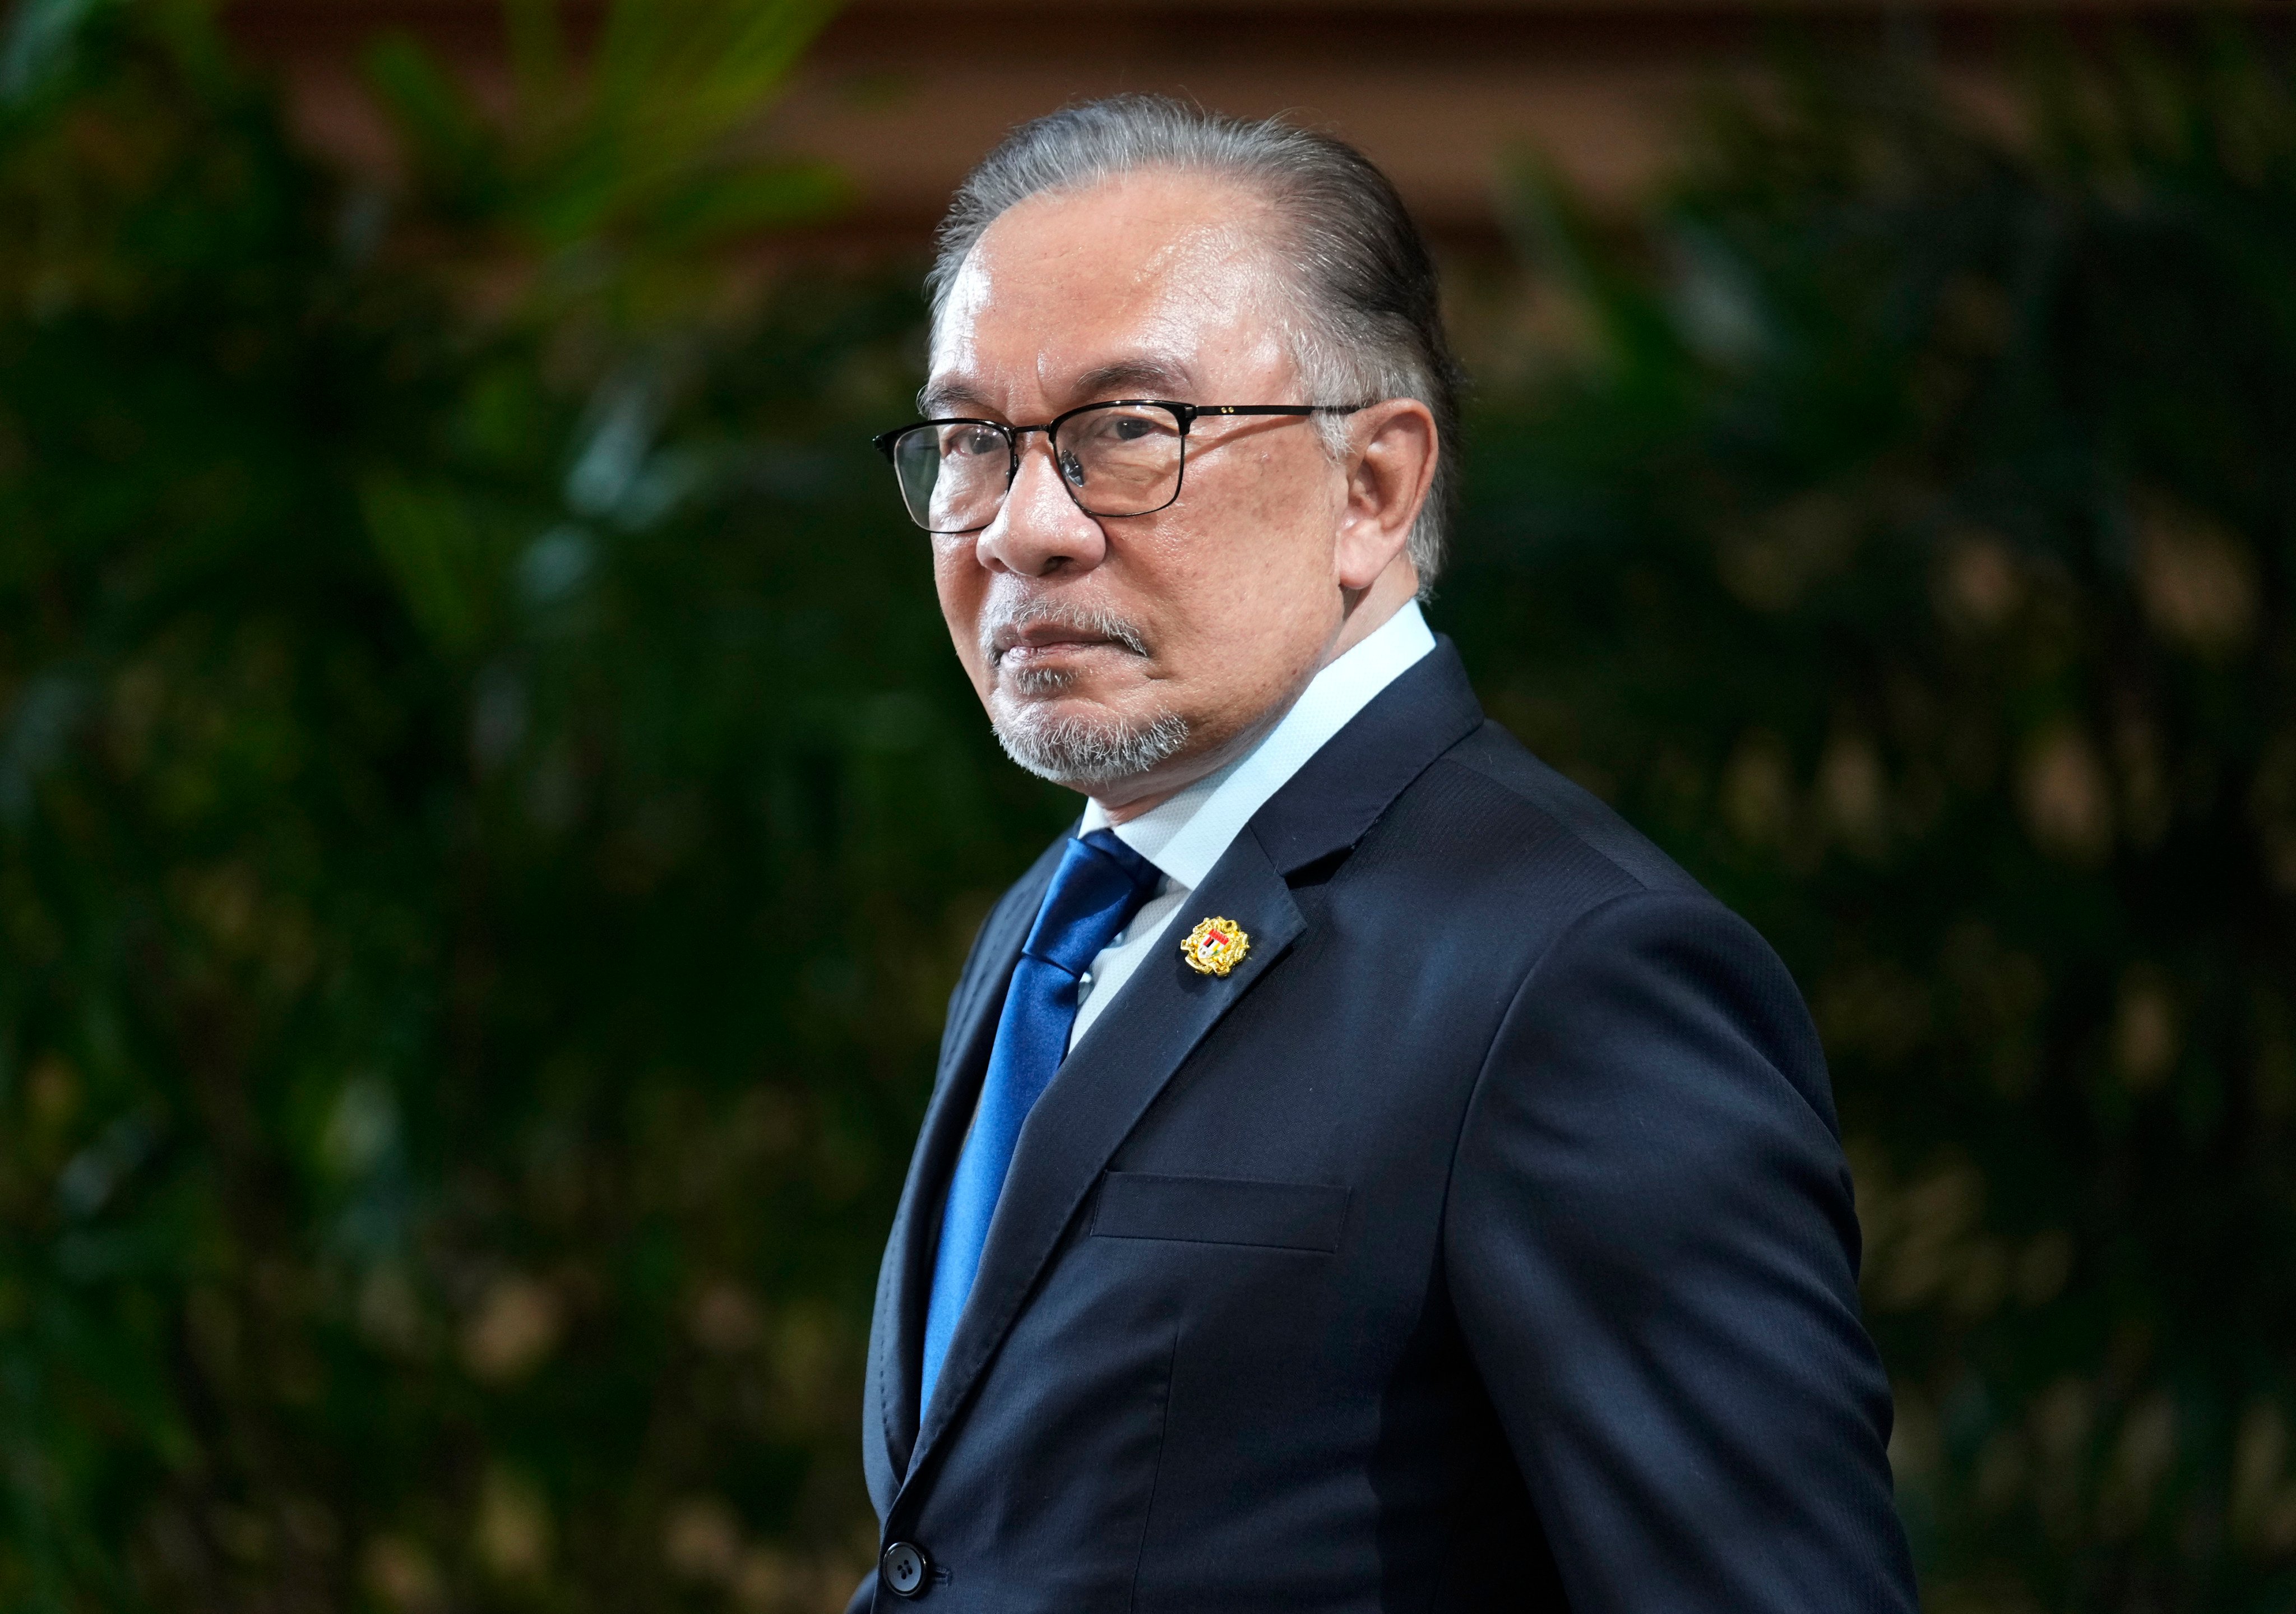 Prime Minister Anwar Ibrahim said Malaysia hopes China and the United States will “resolve their differences”. Photo Pool via AP